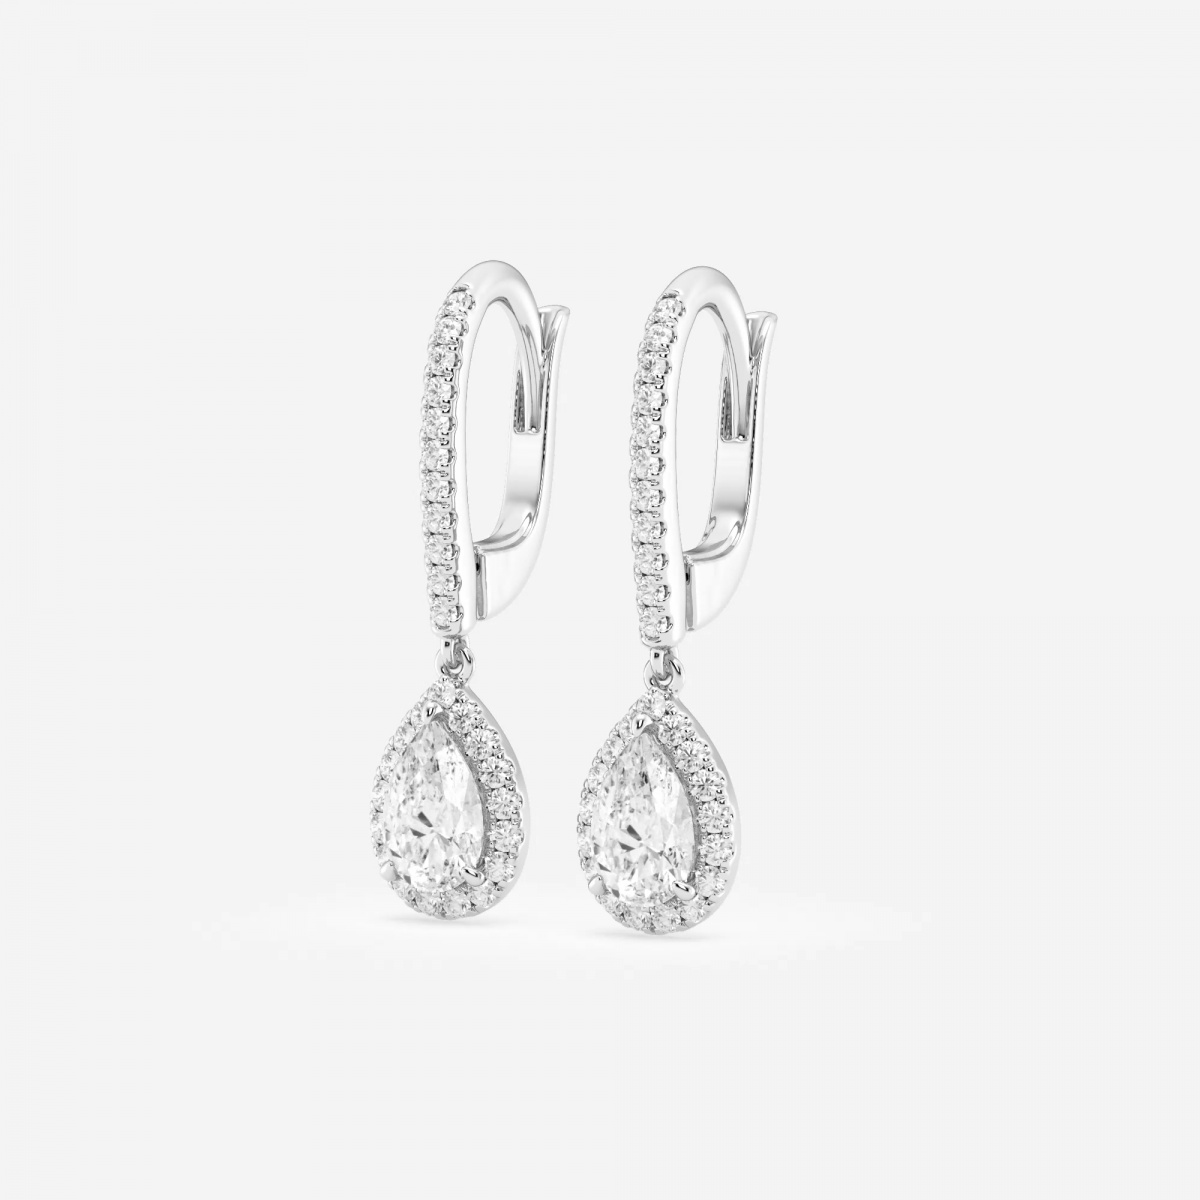 Additional Image 1 for  1 1/4 ctw Pear Lab Grown Diamond Halo Drop Earrings